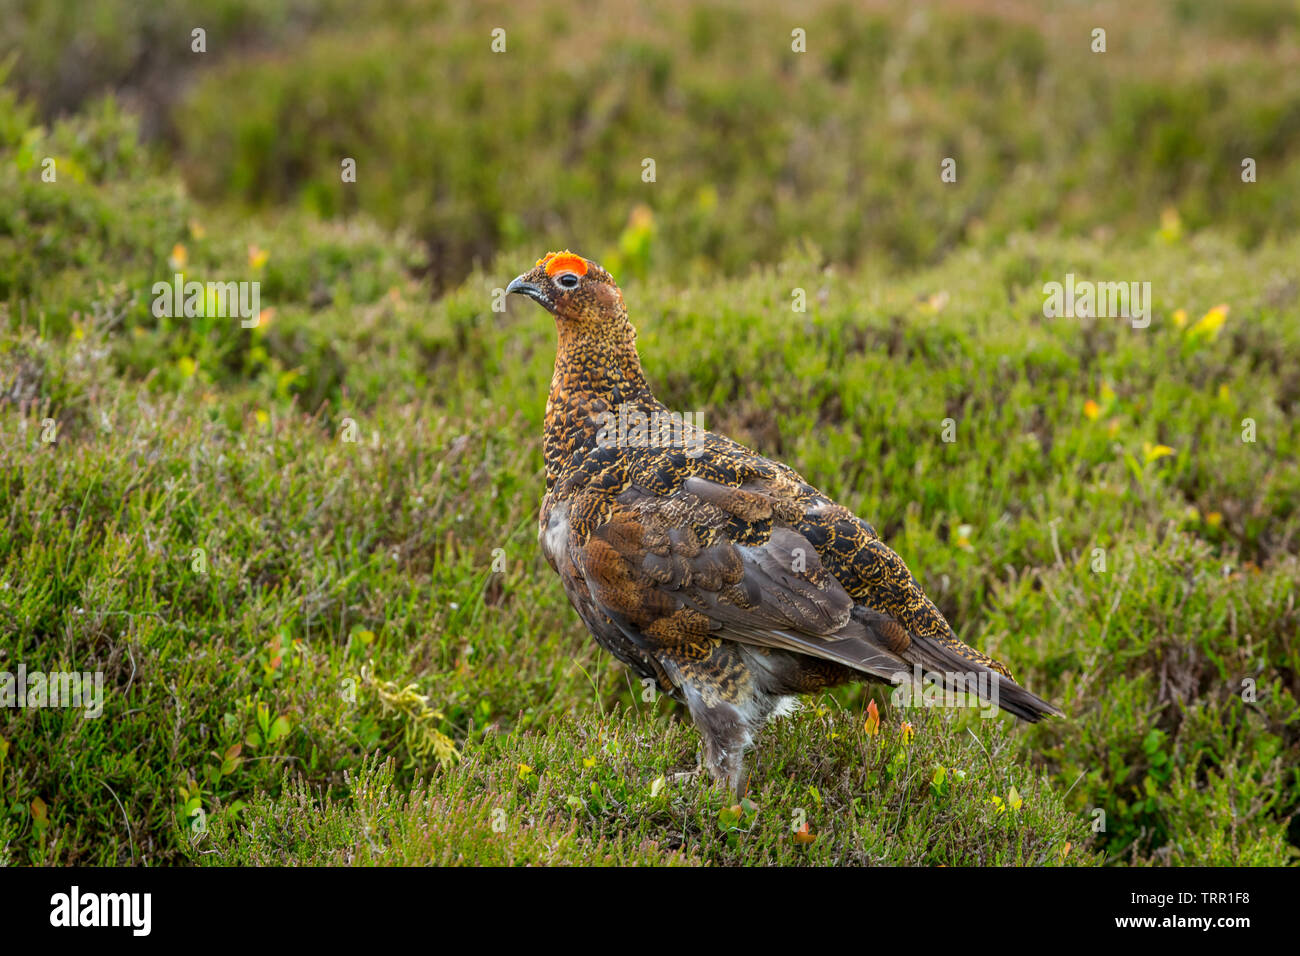 Red Grouse male with bright red eyebrow during the nesting season.  Stood in natural moorland habitat, Scientific name: Lagopus lagopus. Landscape Stock Photo